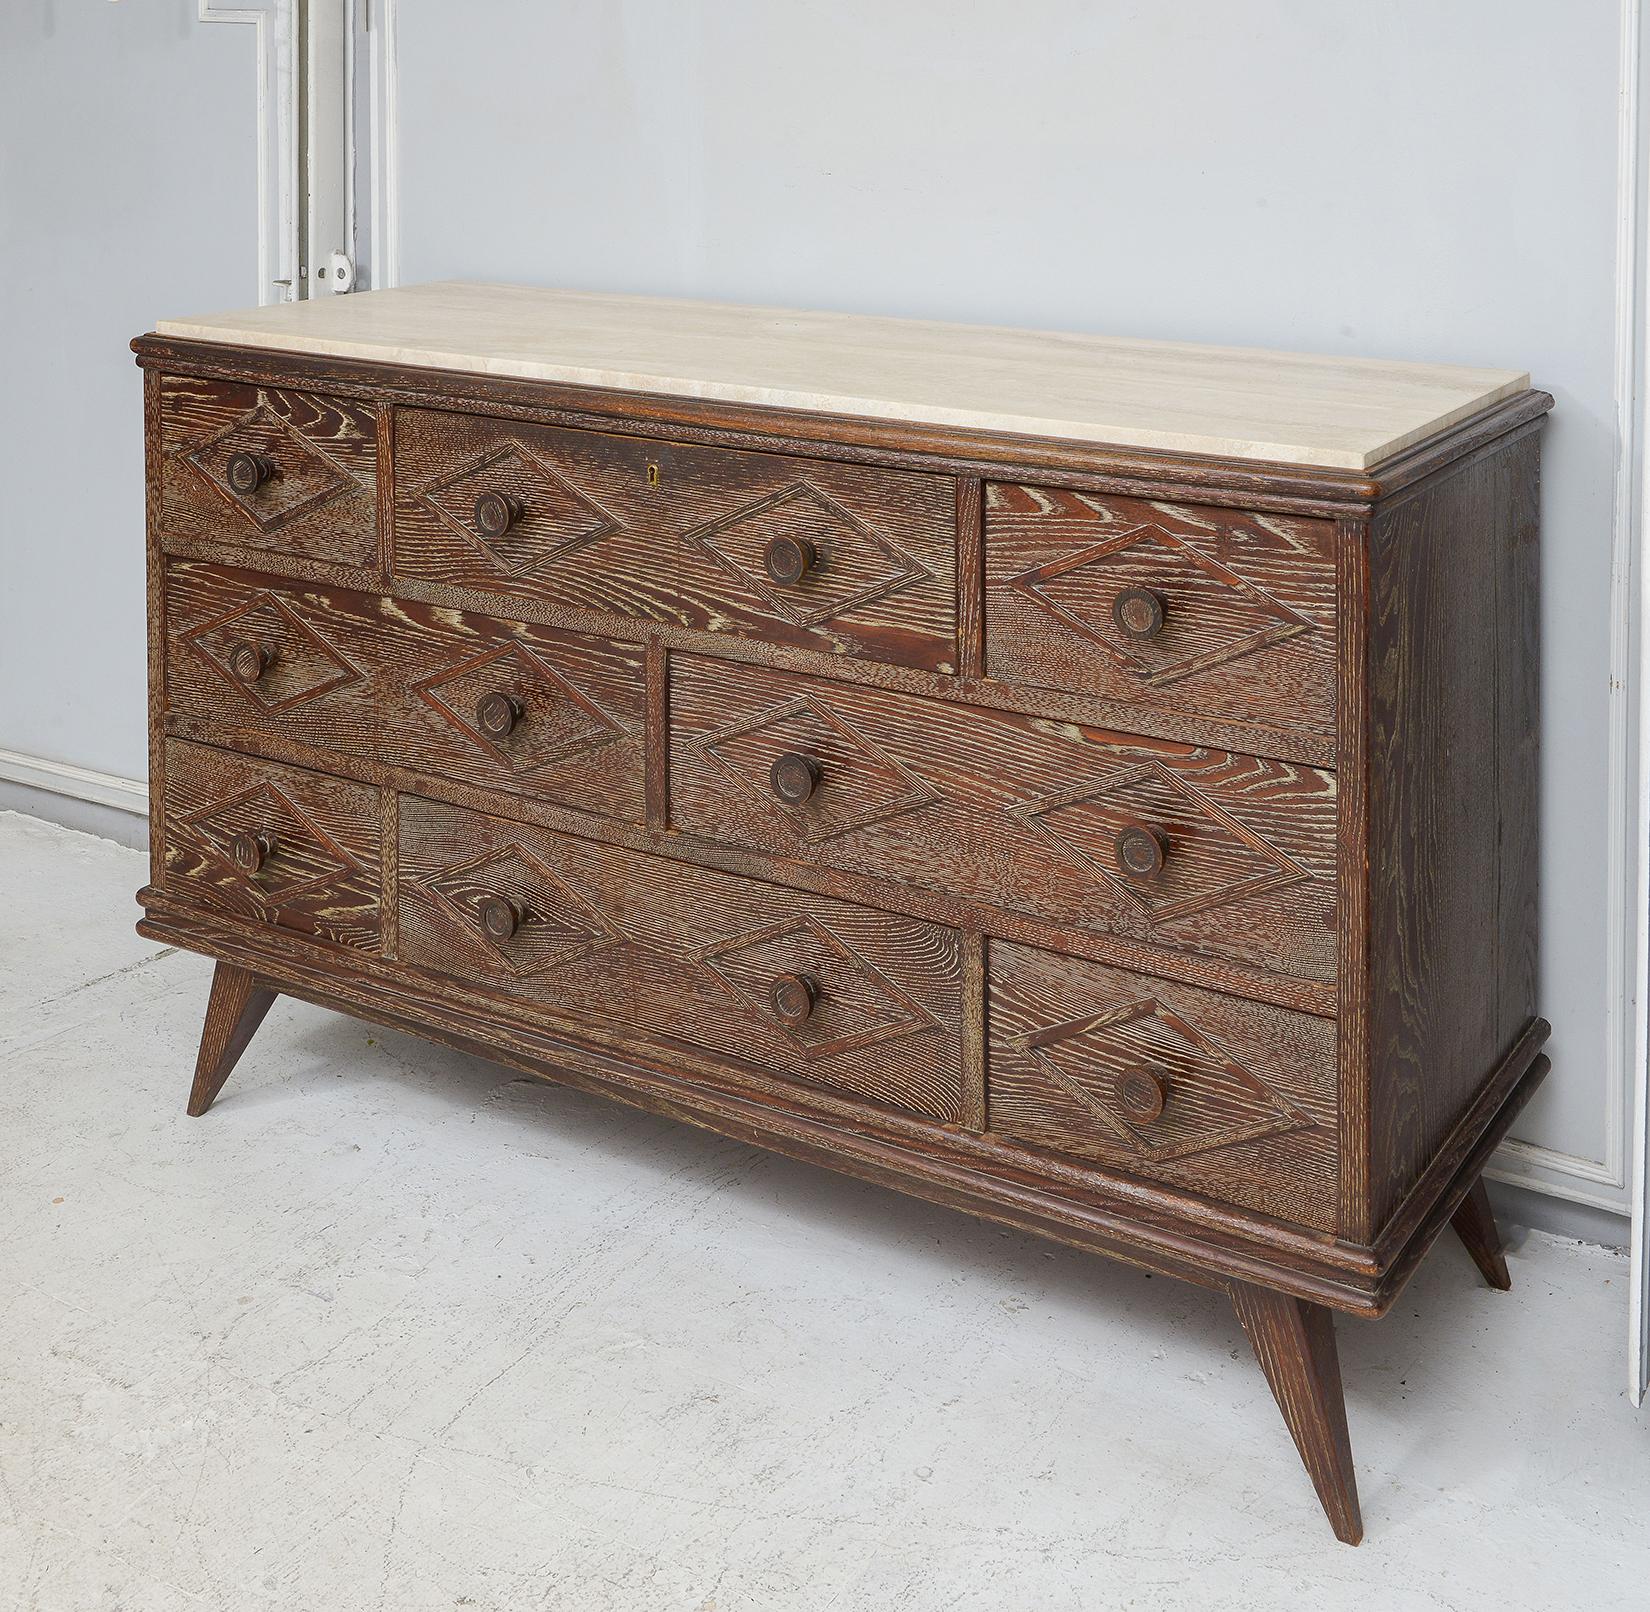 Unusual French Midcentury Cerused Oak Chest In Excellent Condition For Sale In New York, NY